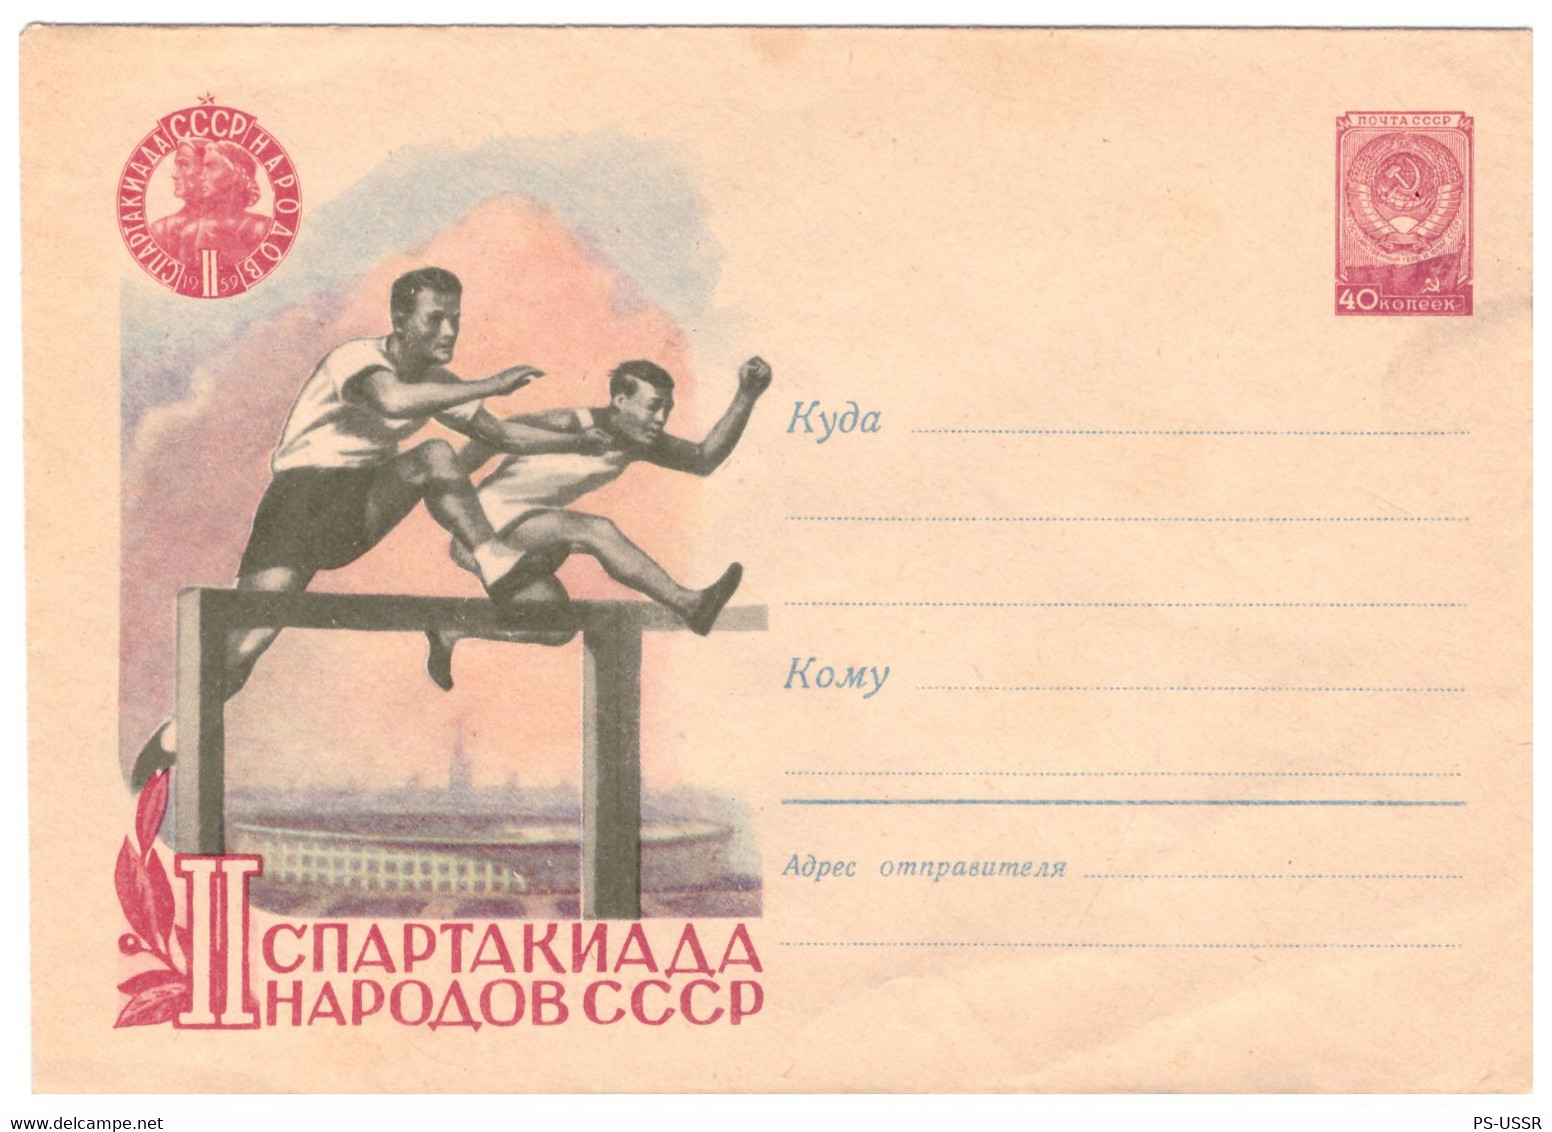 USSR 1959 HURDLE RACE II SPARTAKIAD OF THE NATIONS PSE UNUSED COVER ILLUSTRATED STAMPED ENVELOPE GANZSACHE SOVIET UNION - 1950-59